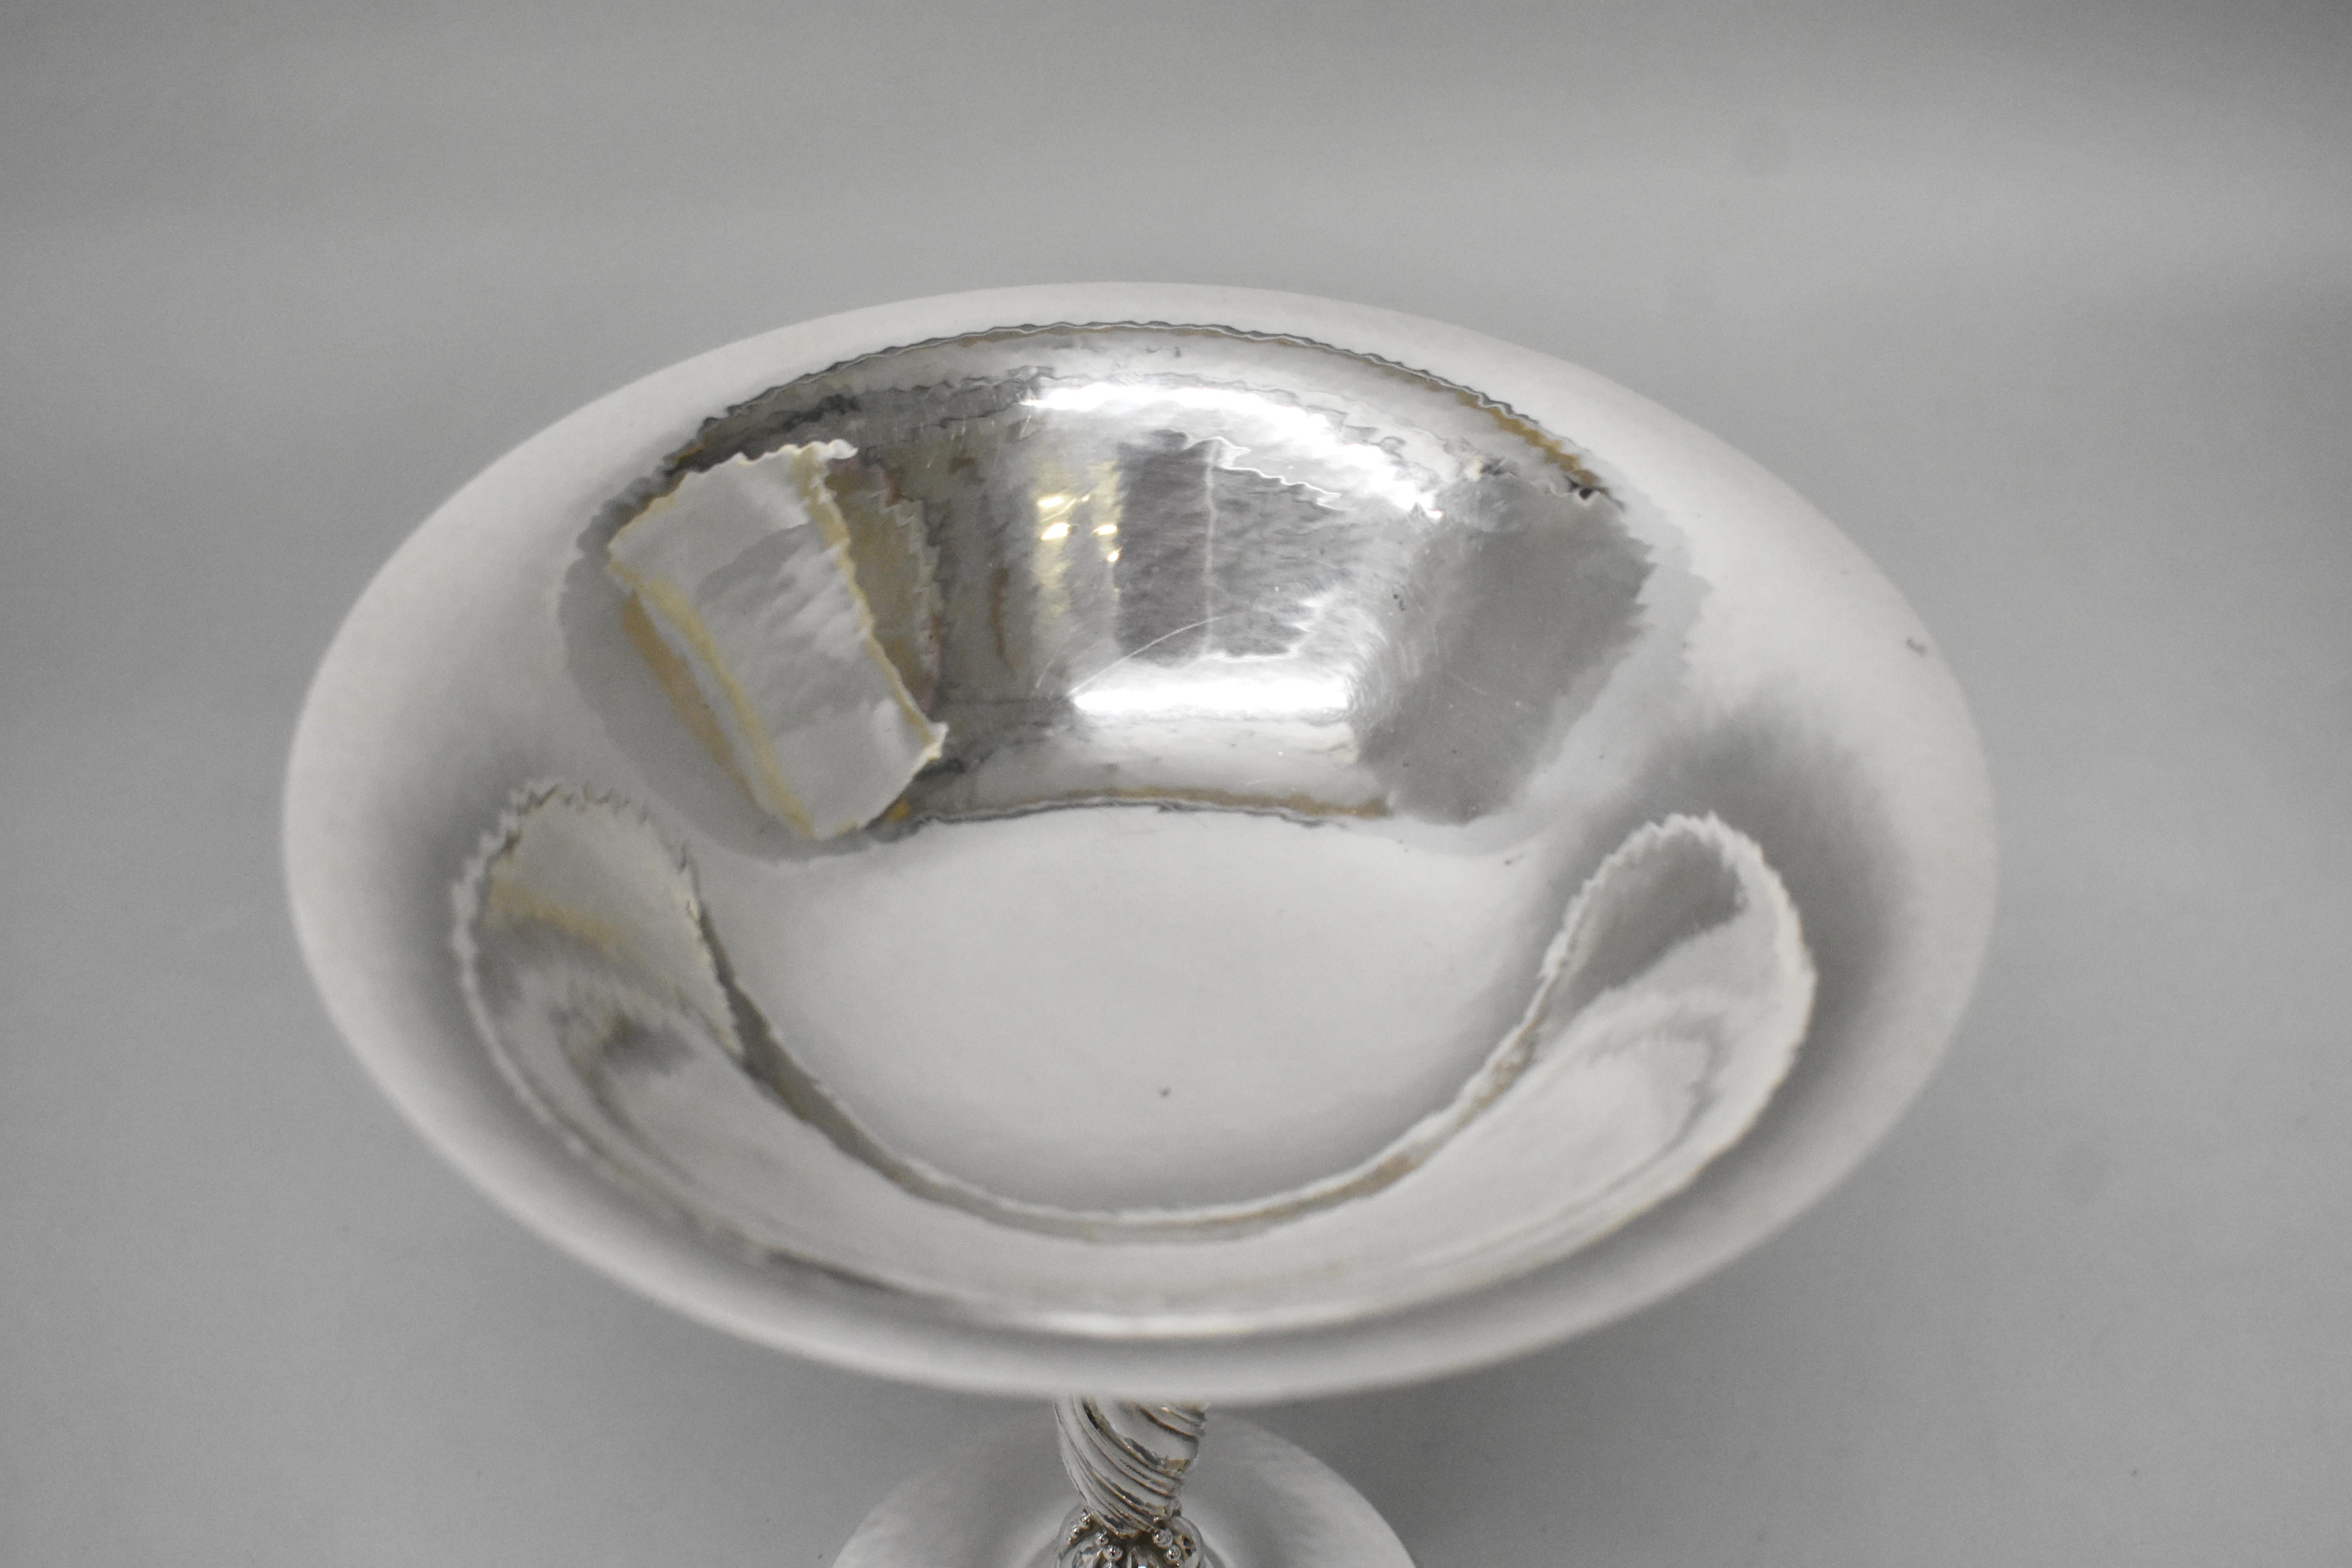 Beautiful sterling Tazza compote in grape motif by Georg Jensen, circa 1918. Marked 263 B.  Very good condition. Dimensions: 7